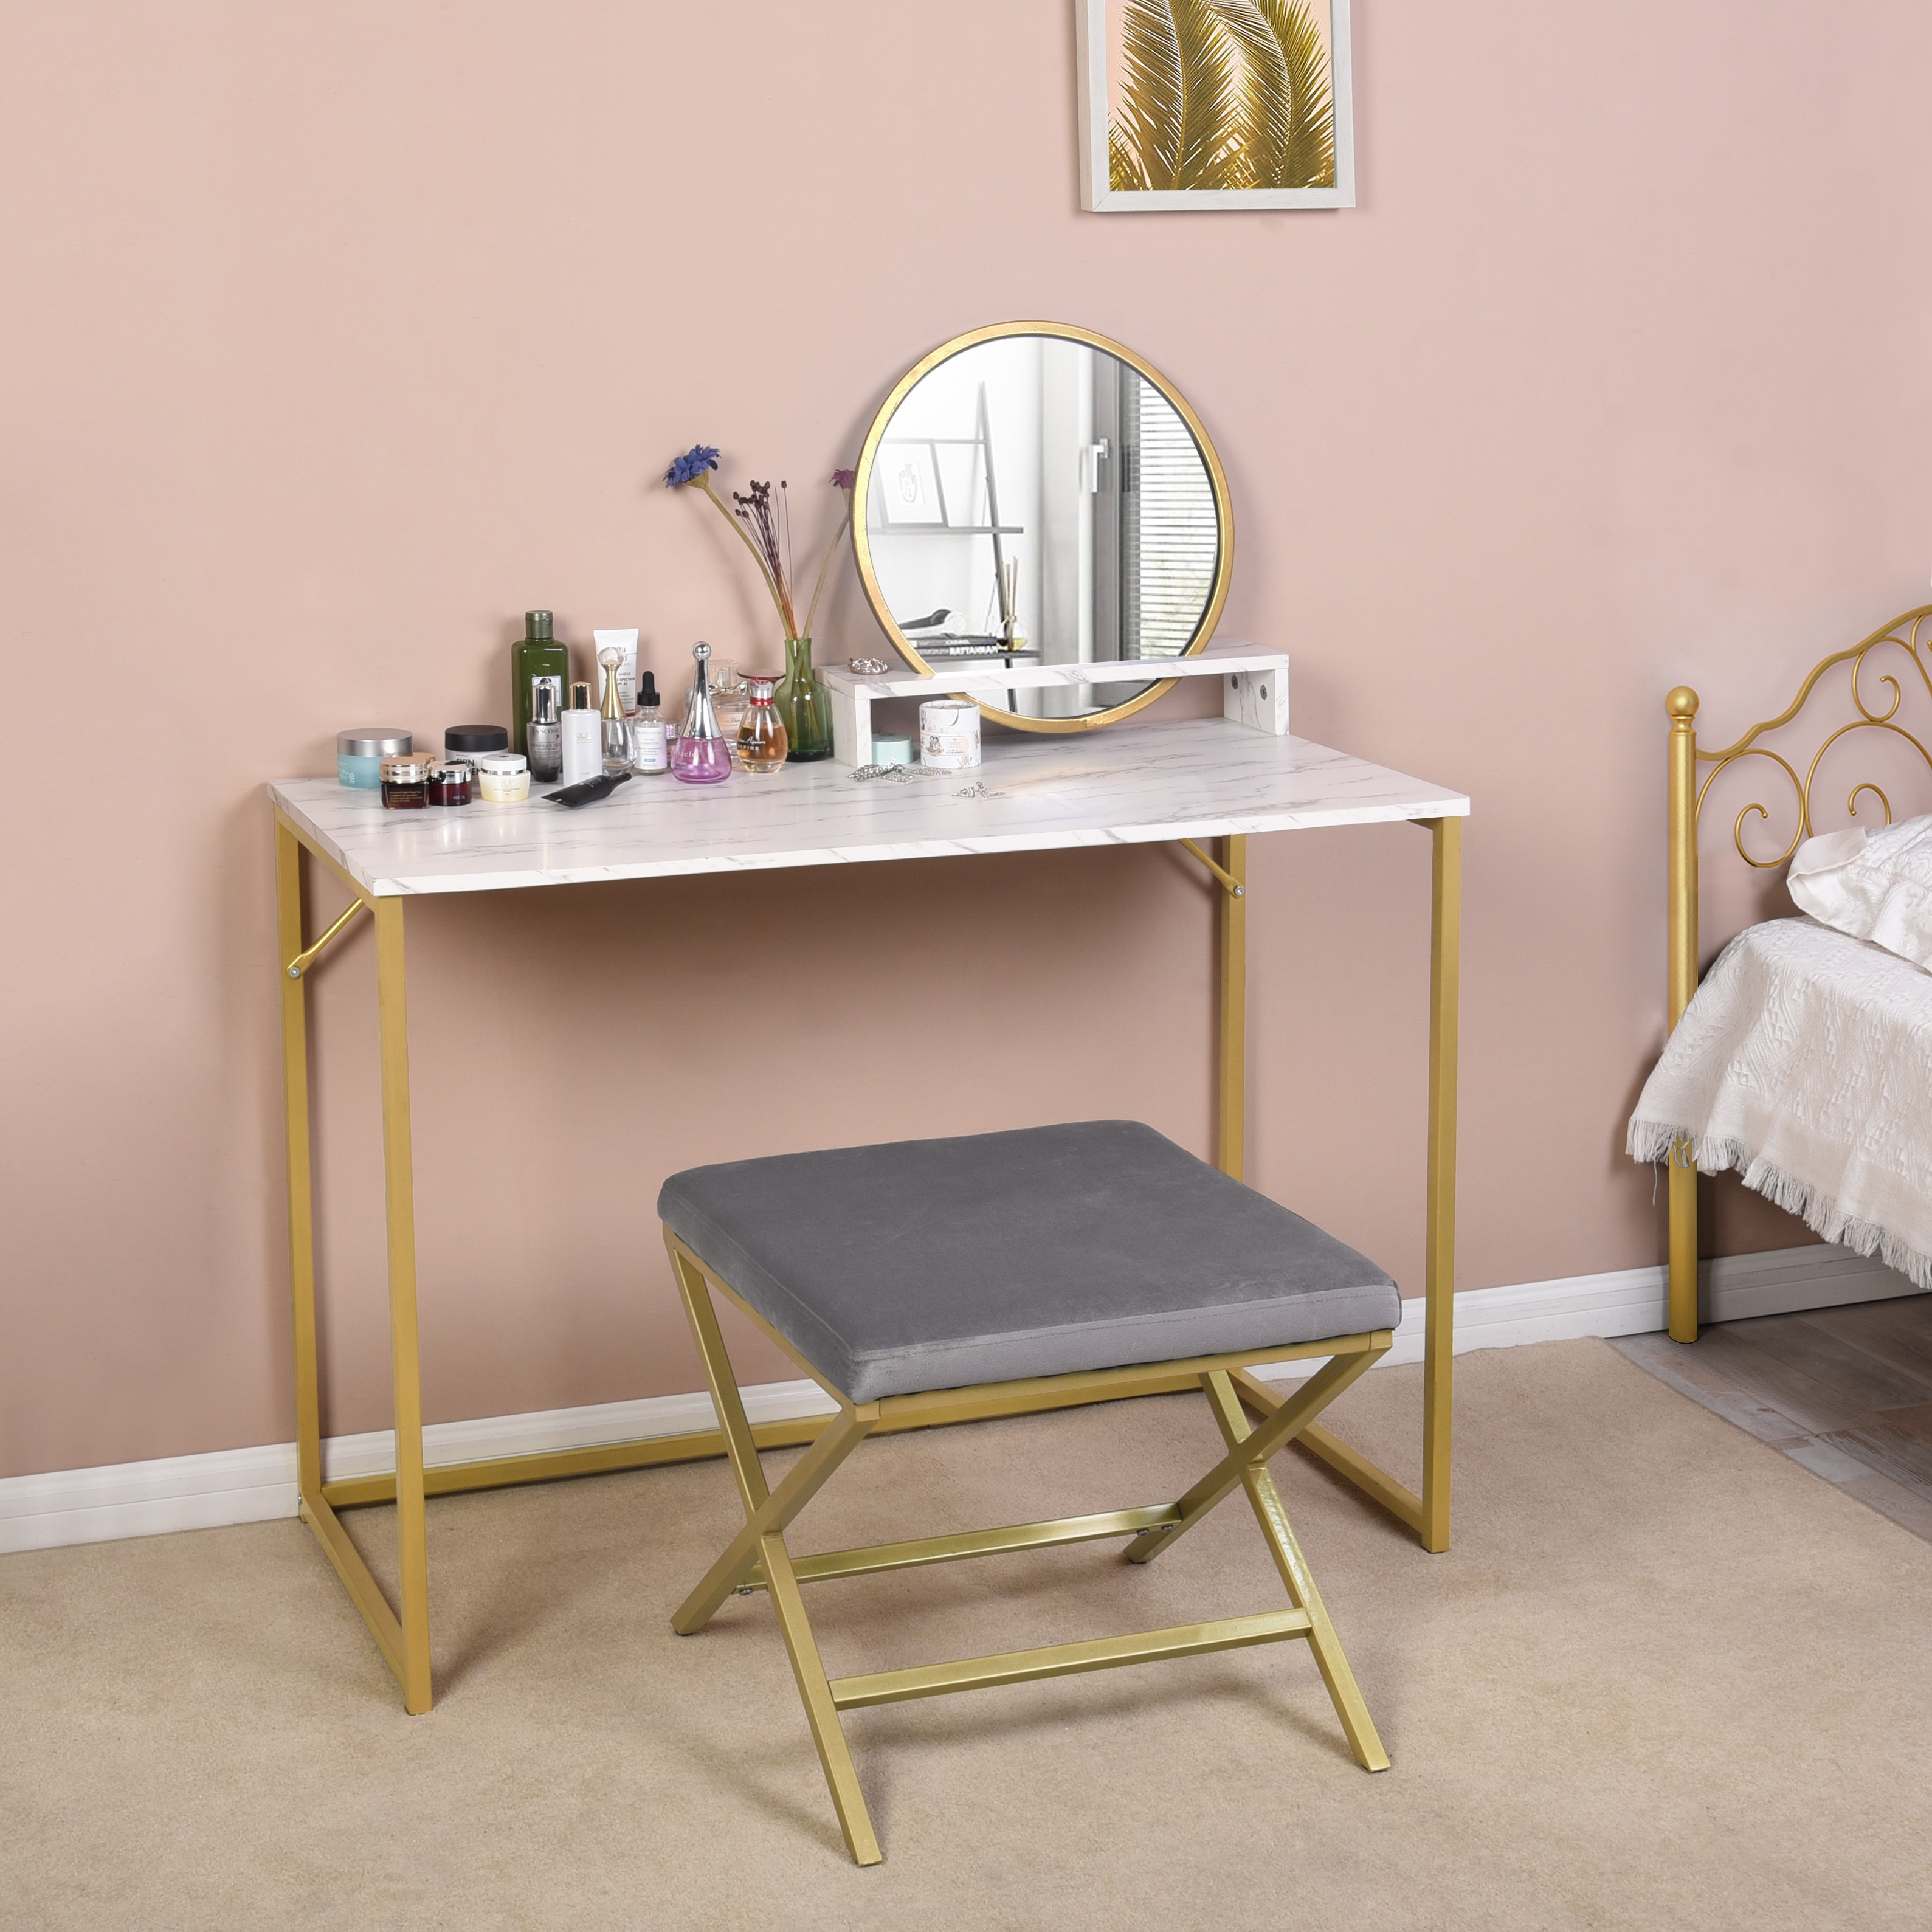 Homy Casa Modern Faux Marble Makeup Vanity Dressing Table with Removable Mirror - Standard - On Sale Bed Bath & Beyond - 34934272